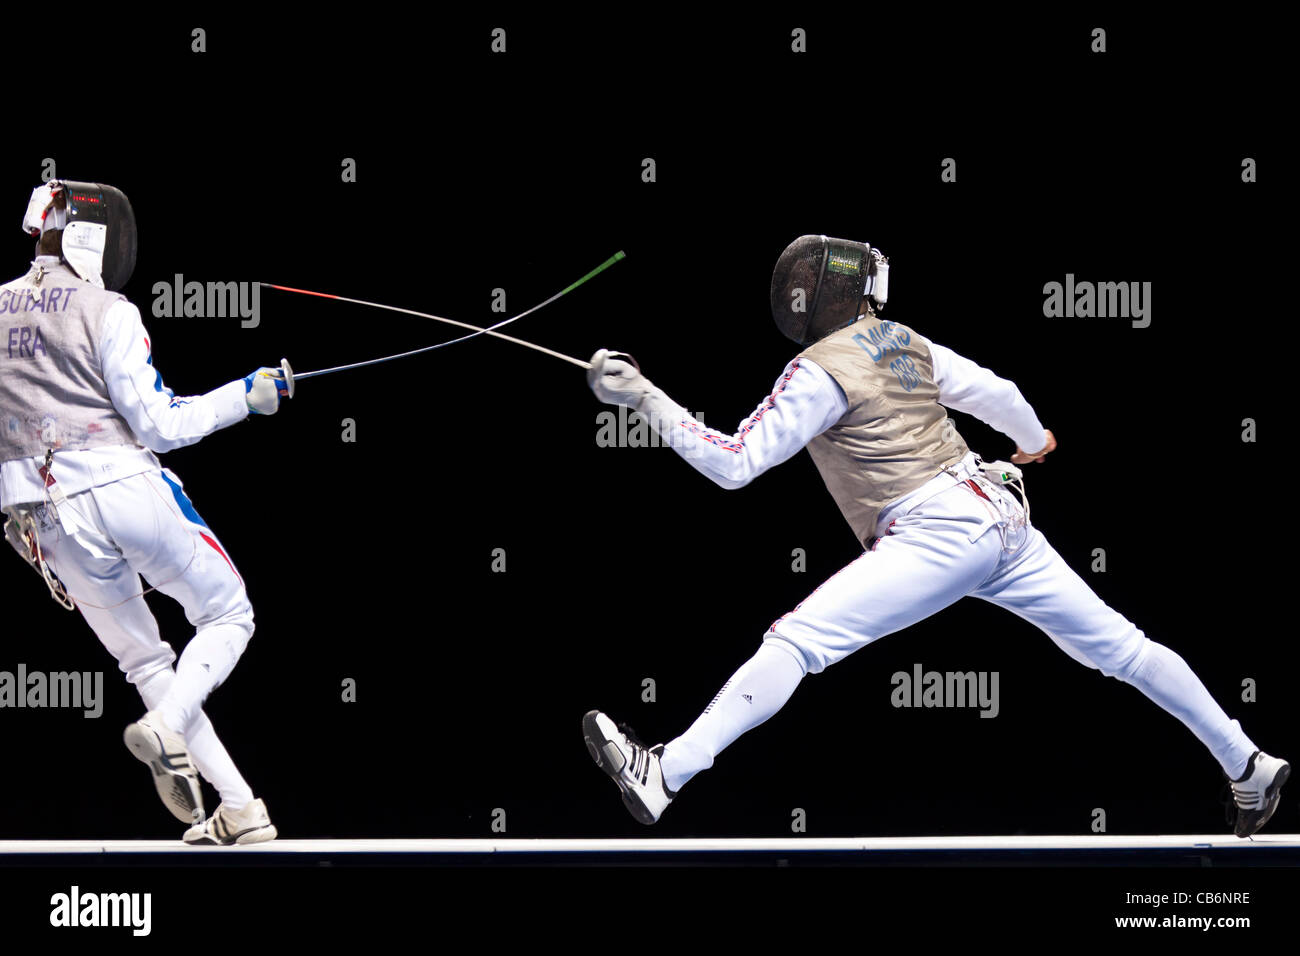 Final of the team foil fencing at the Olympic test event, London's ExCeL arena. Won by Team GB. Stock Photo